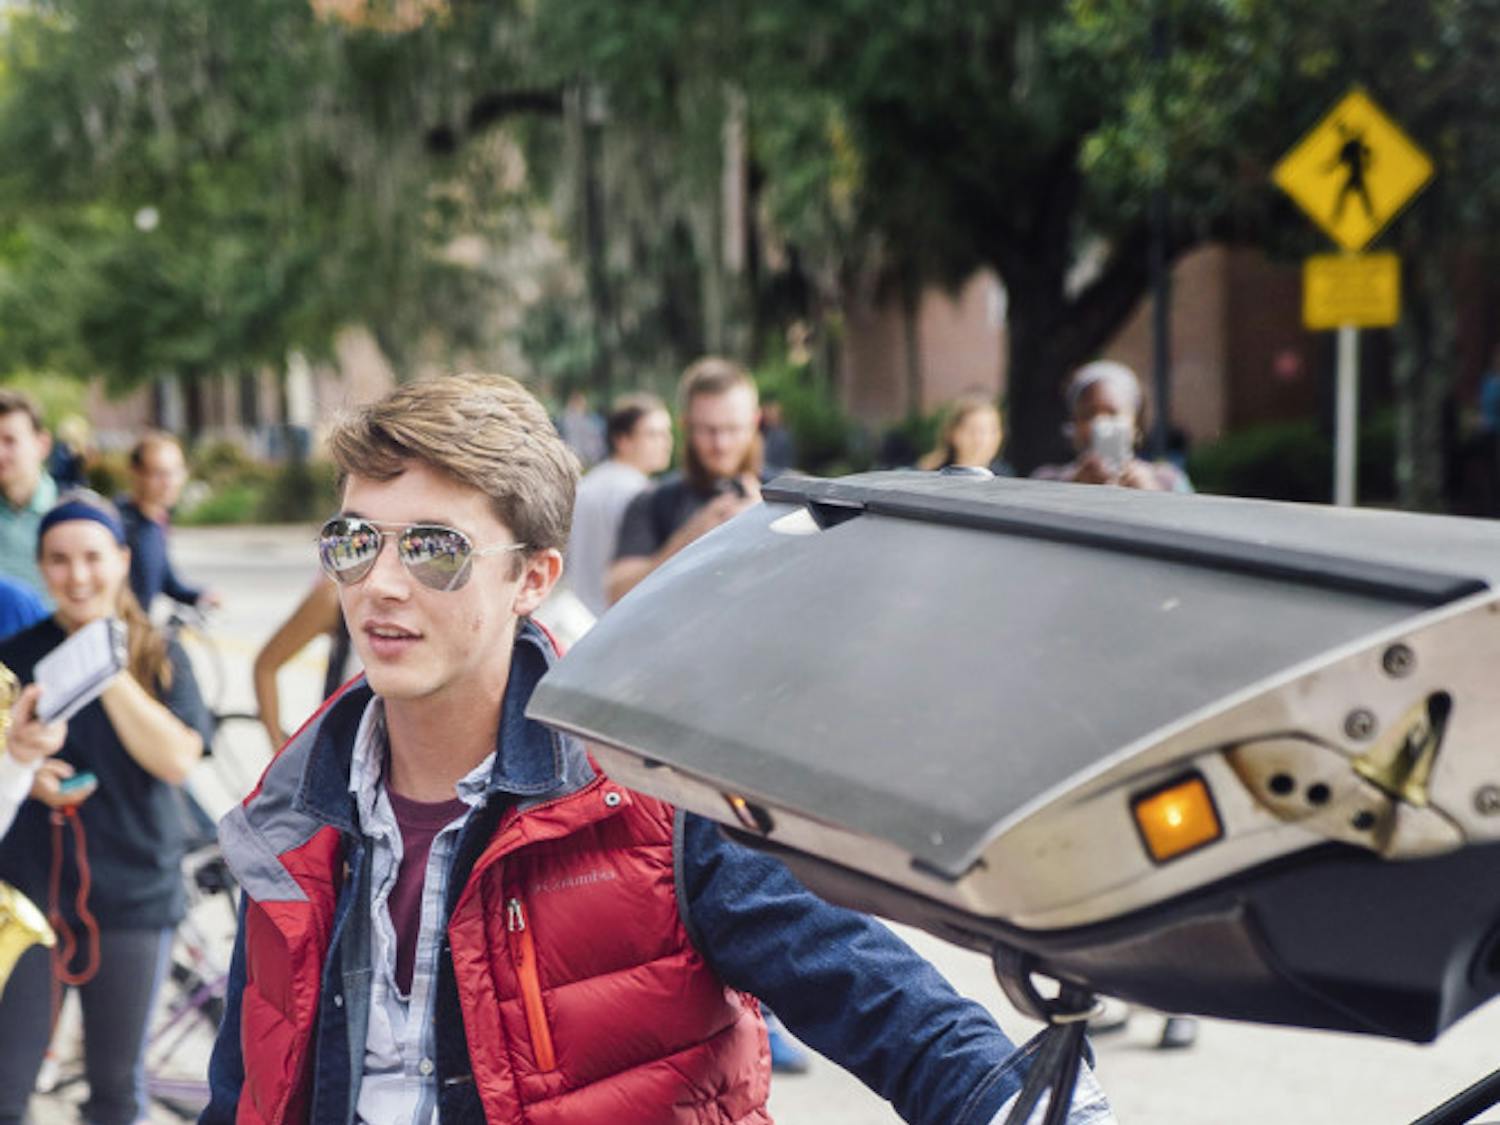 Trace Hance, a 21-year-old telecommunication senior, poses for a group of about 600 students with his DeLorean car on the Plaza of the Americas on Oct. 21, 2015, for Back to the Future day celebrations. “As I stepped out of the car, the band parted and then I saw a semi-circle of phones staring at me,” Hance said.